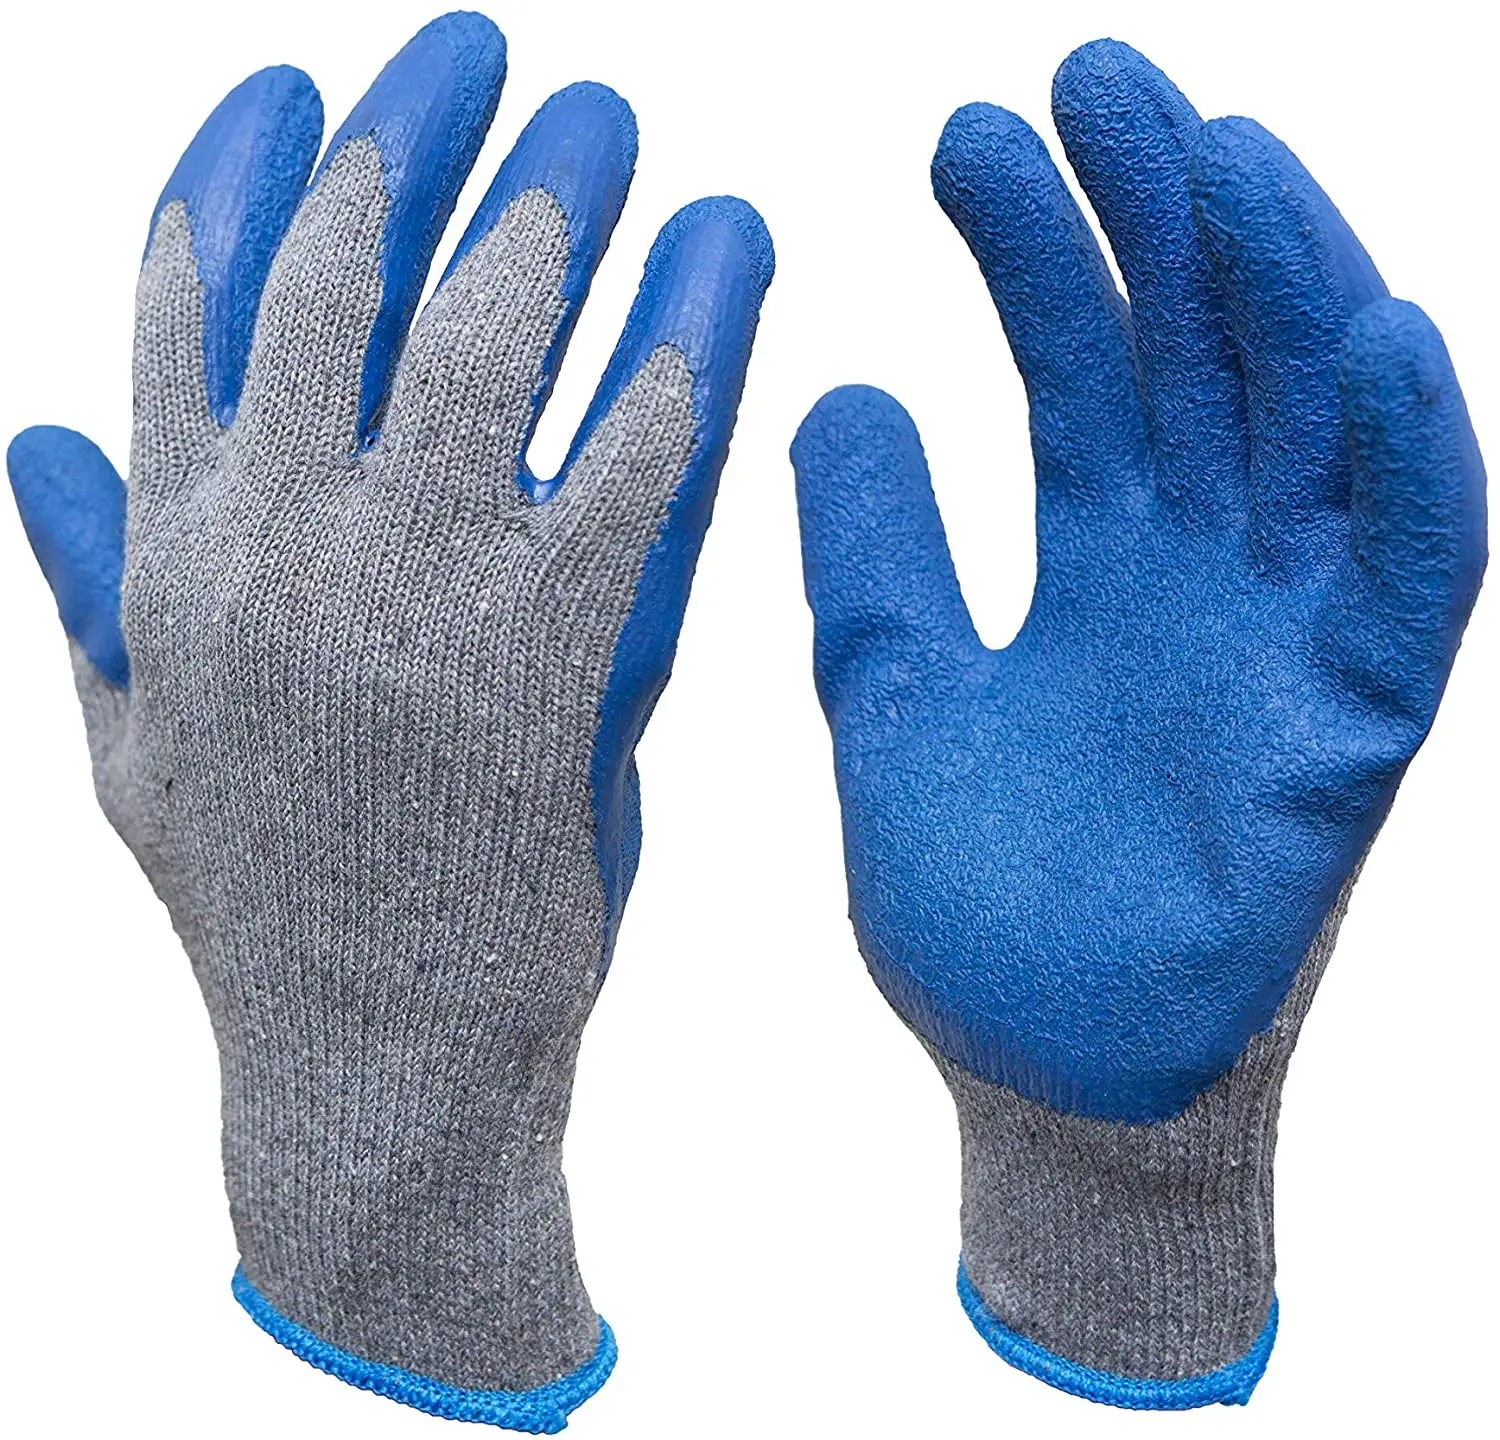 Pairs Large Rubber Latex Double Coated Work Gloves for Construction gardening gloves heavy duty Cotton Blend Blue